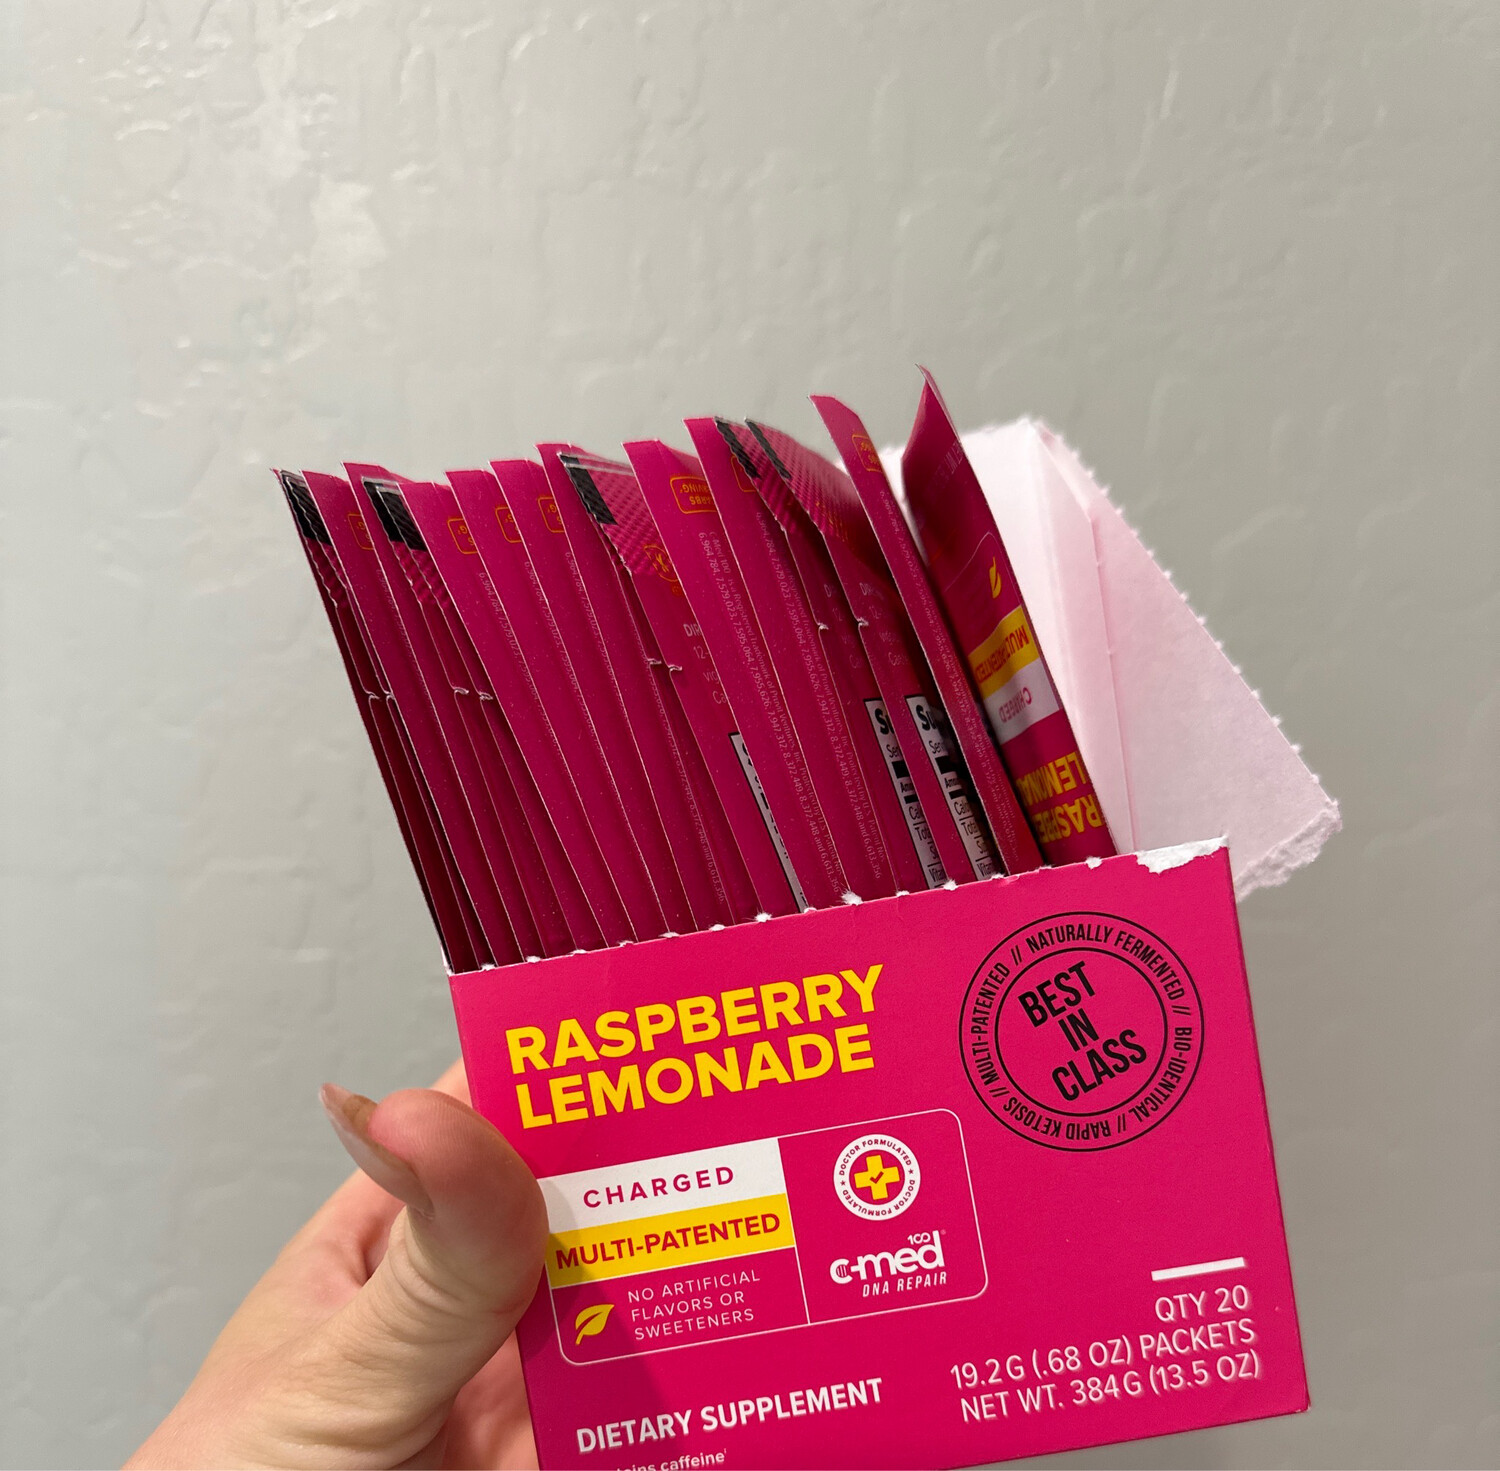 19 Packets Of Raspberry Lemonade Charged (USA ONLY)